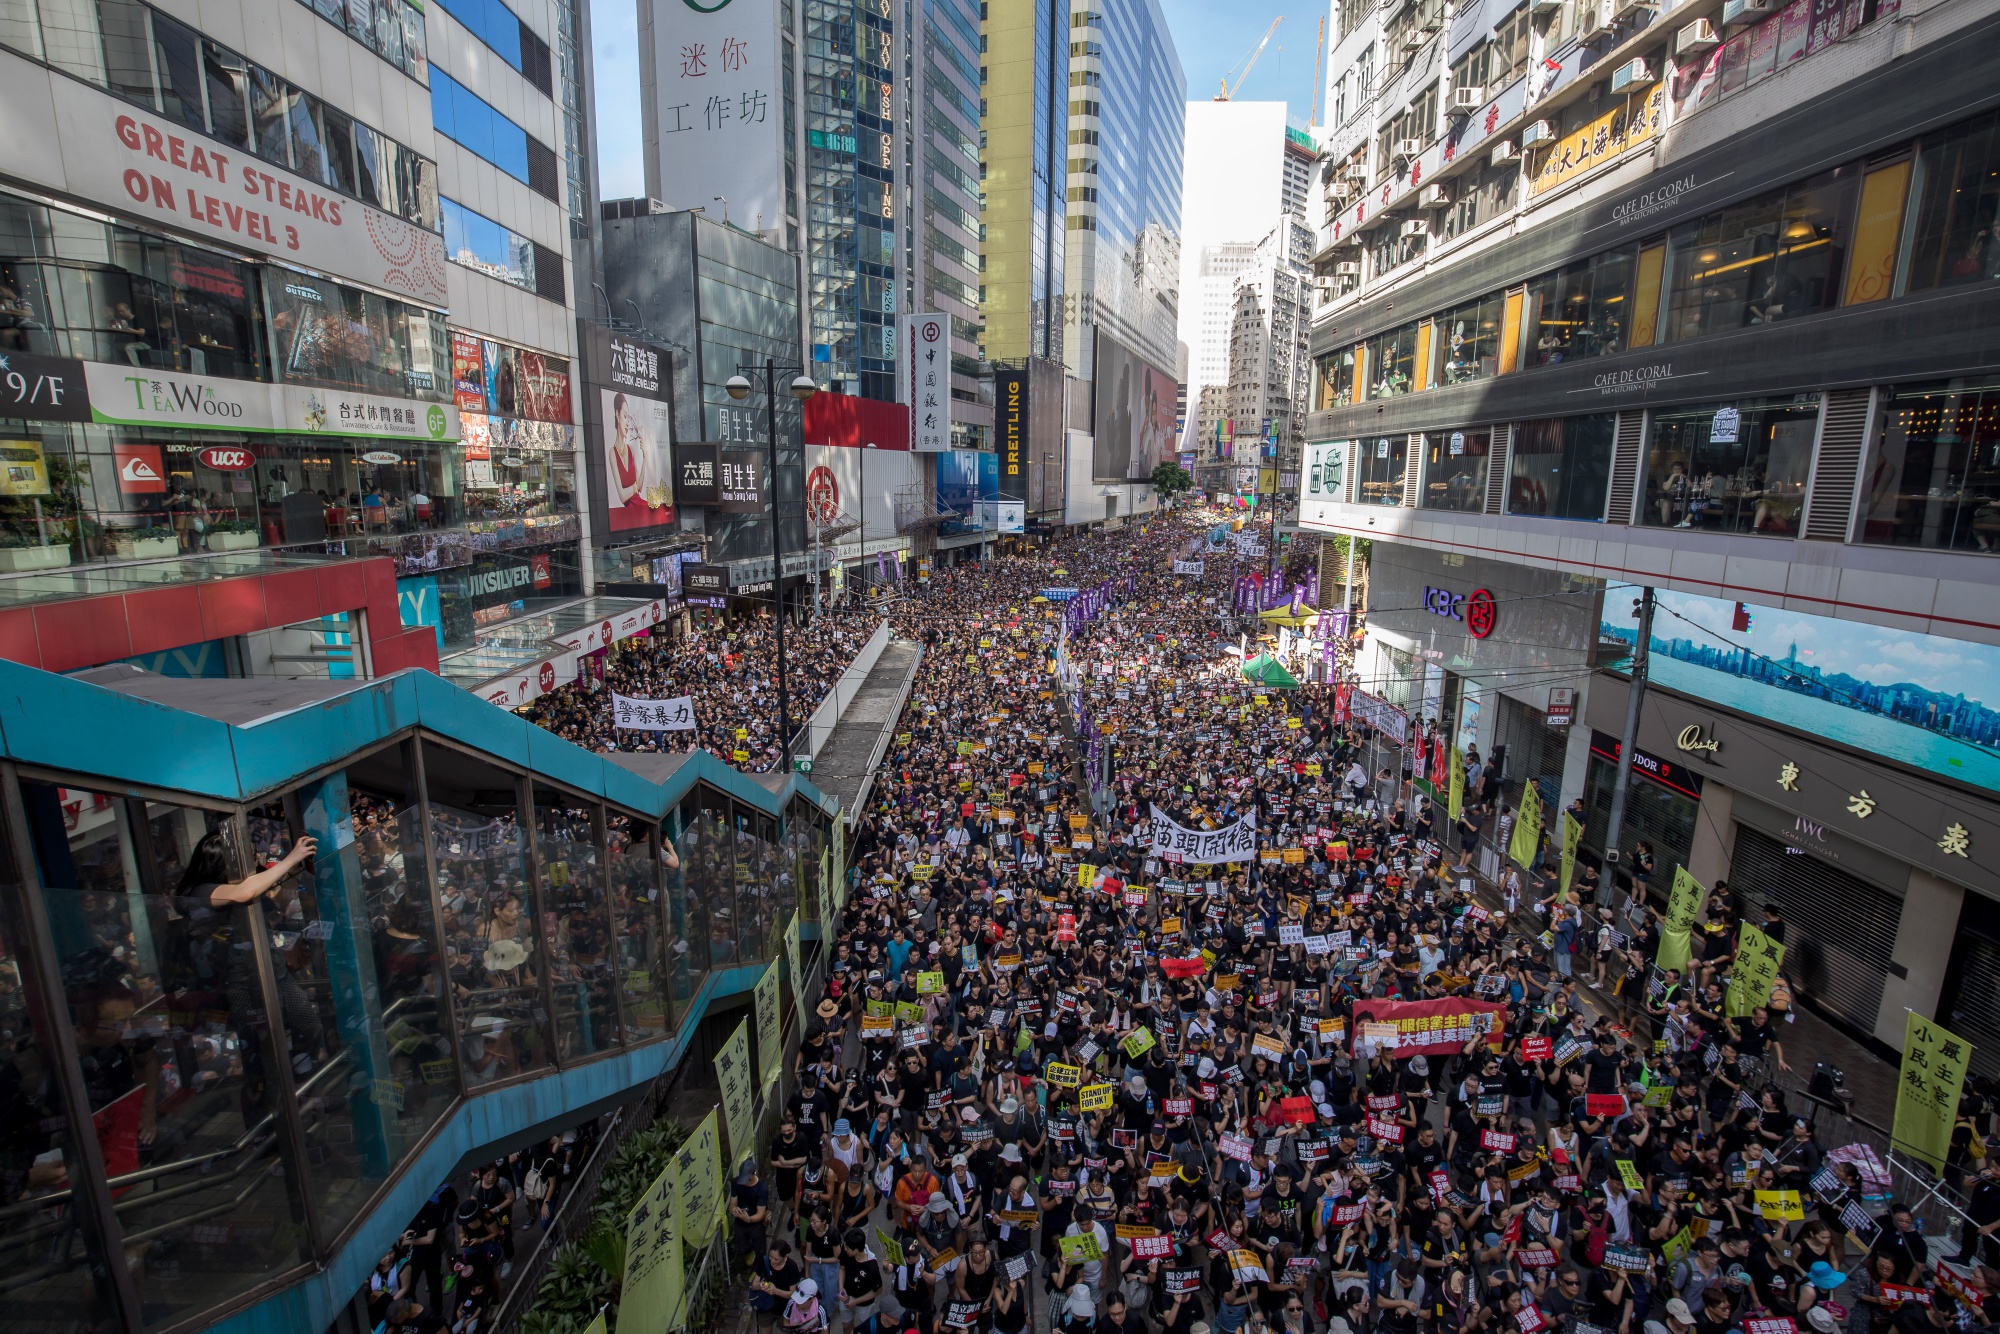 The annual pro-democracy rally in Hong Kong, on July 1, 2019.